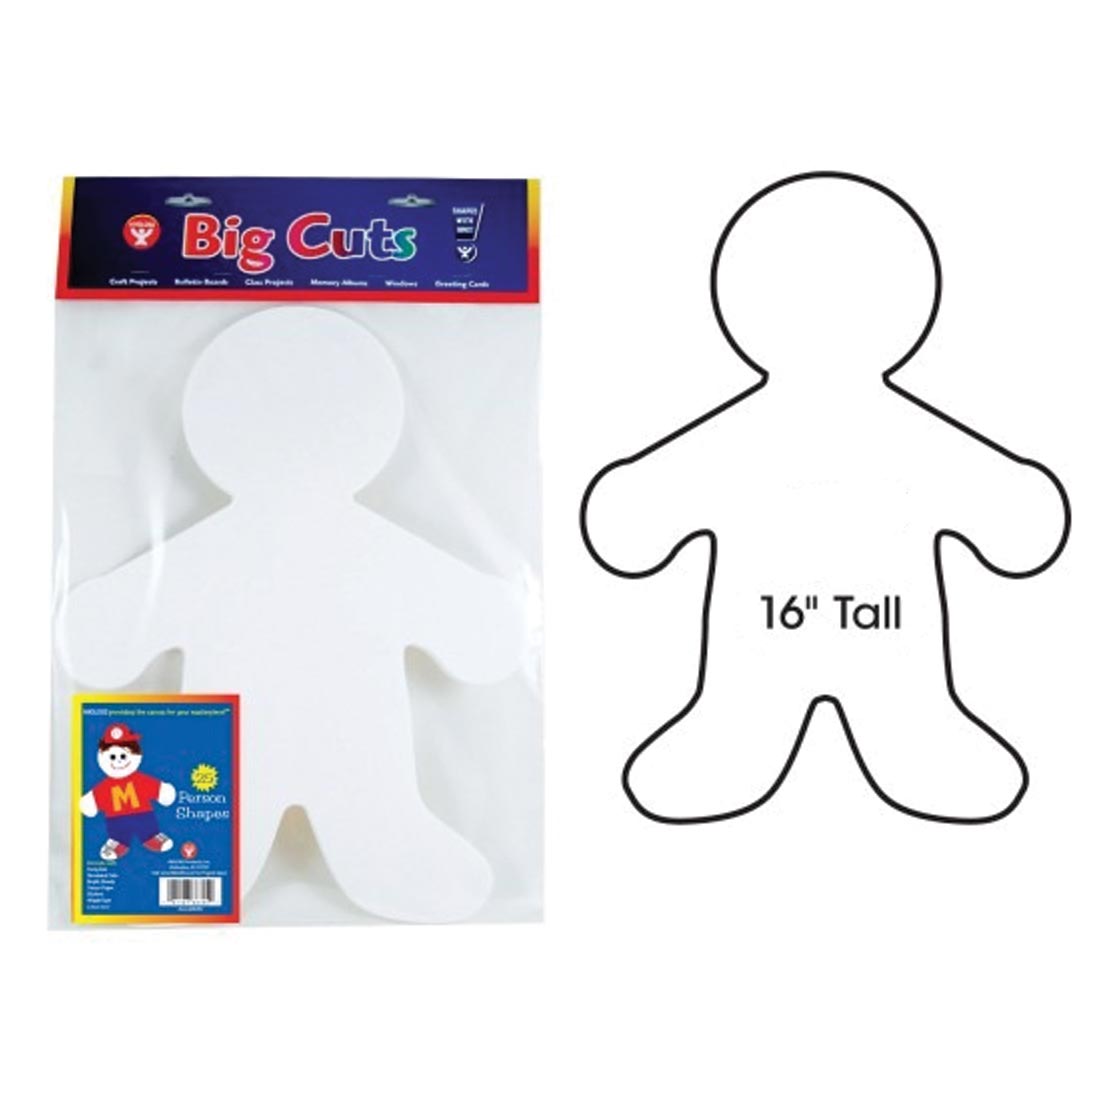 Package of Big Kids Cut-Outs beside an outline drawing of one with the text 16" Tall